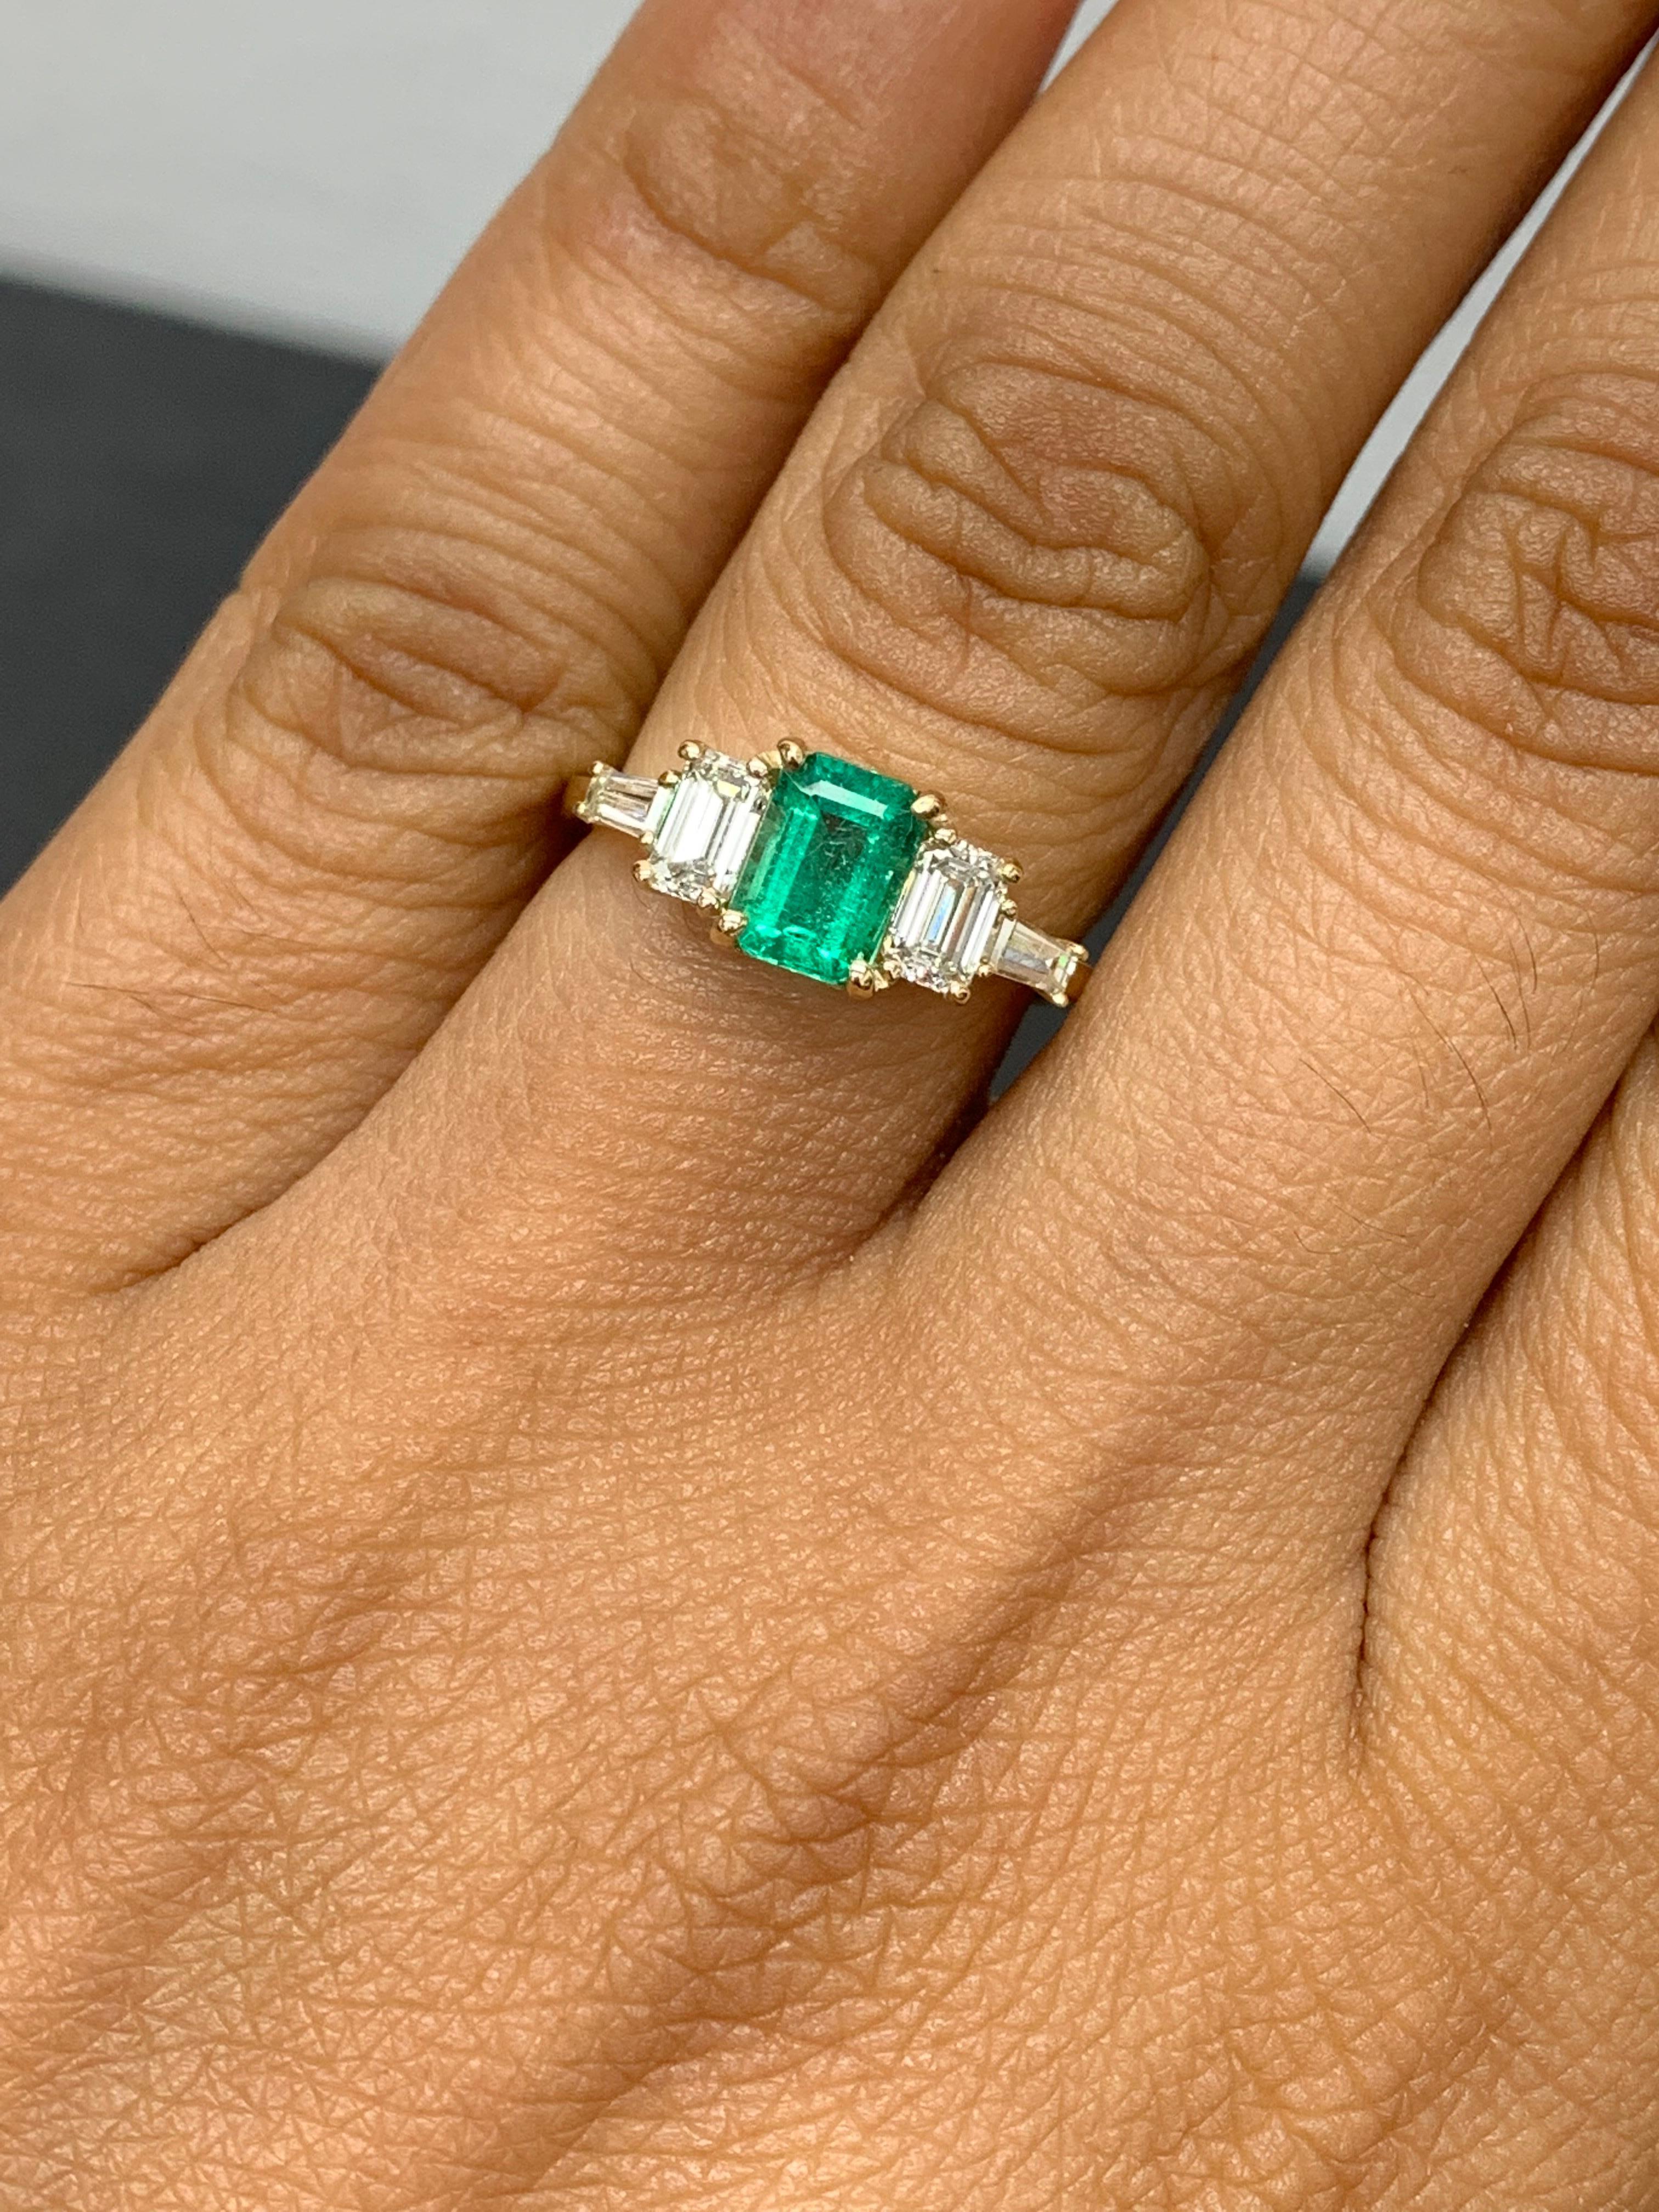 0.72 Carat Emerald Cut Emerald and Diamond 5 Stone Ring in 14K Yellow Gold For Sale 1